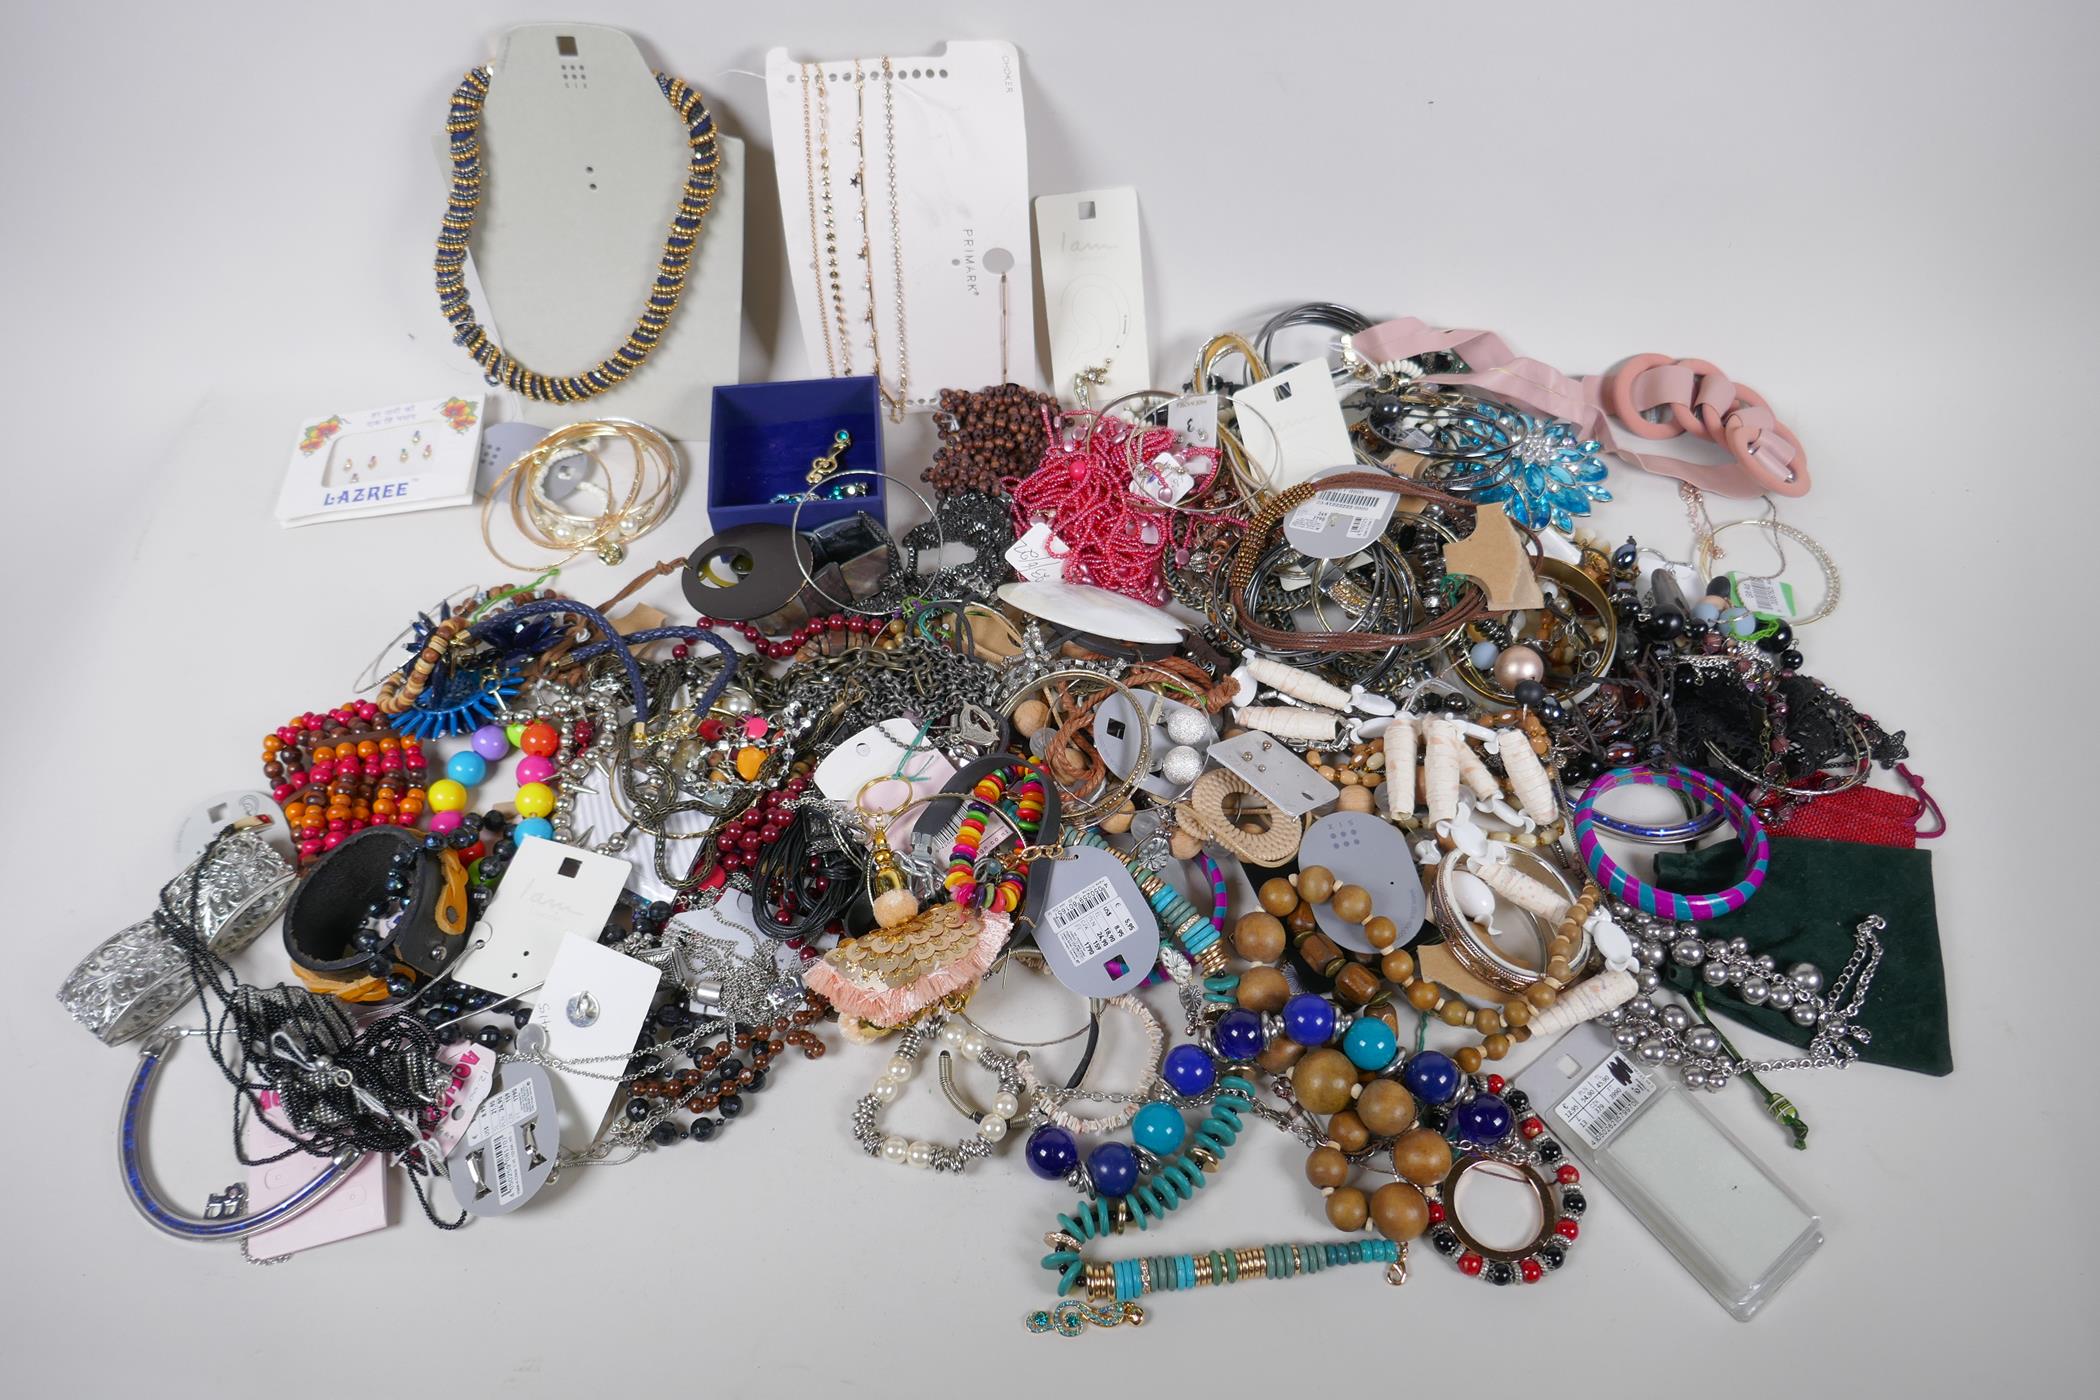 A quantity of costume jewellery including necklaces, bangles, earrings etc - Image 2 of 4